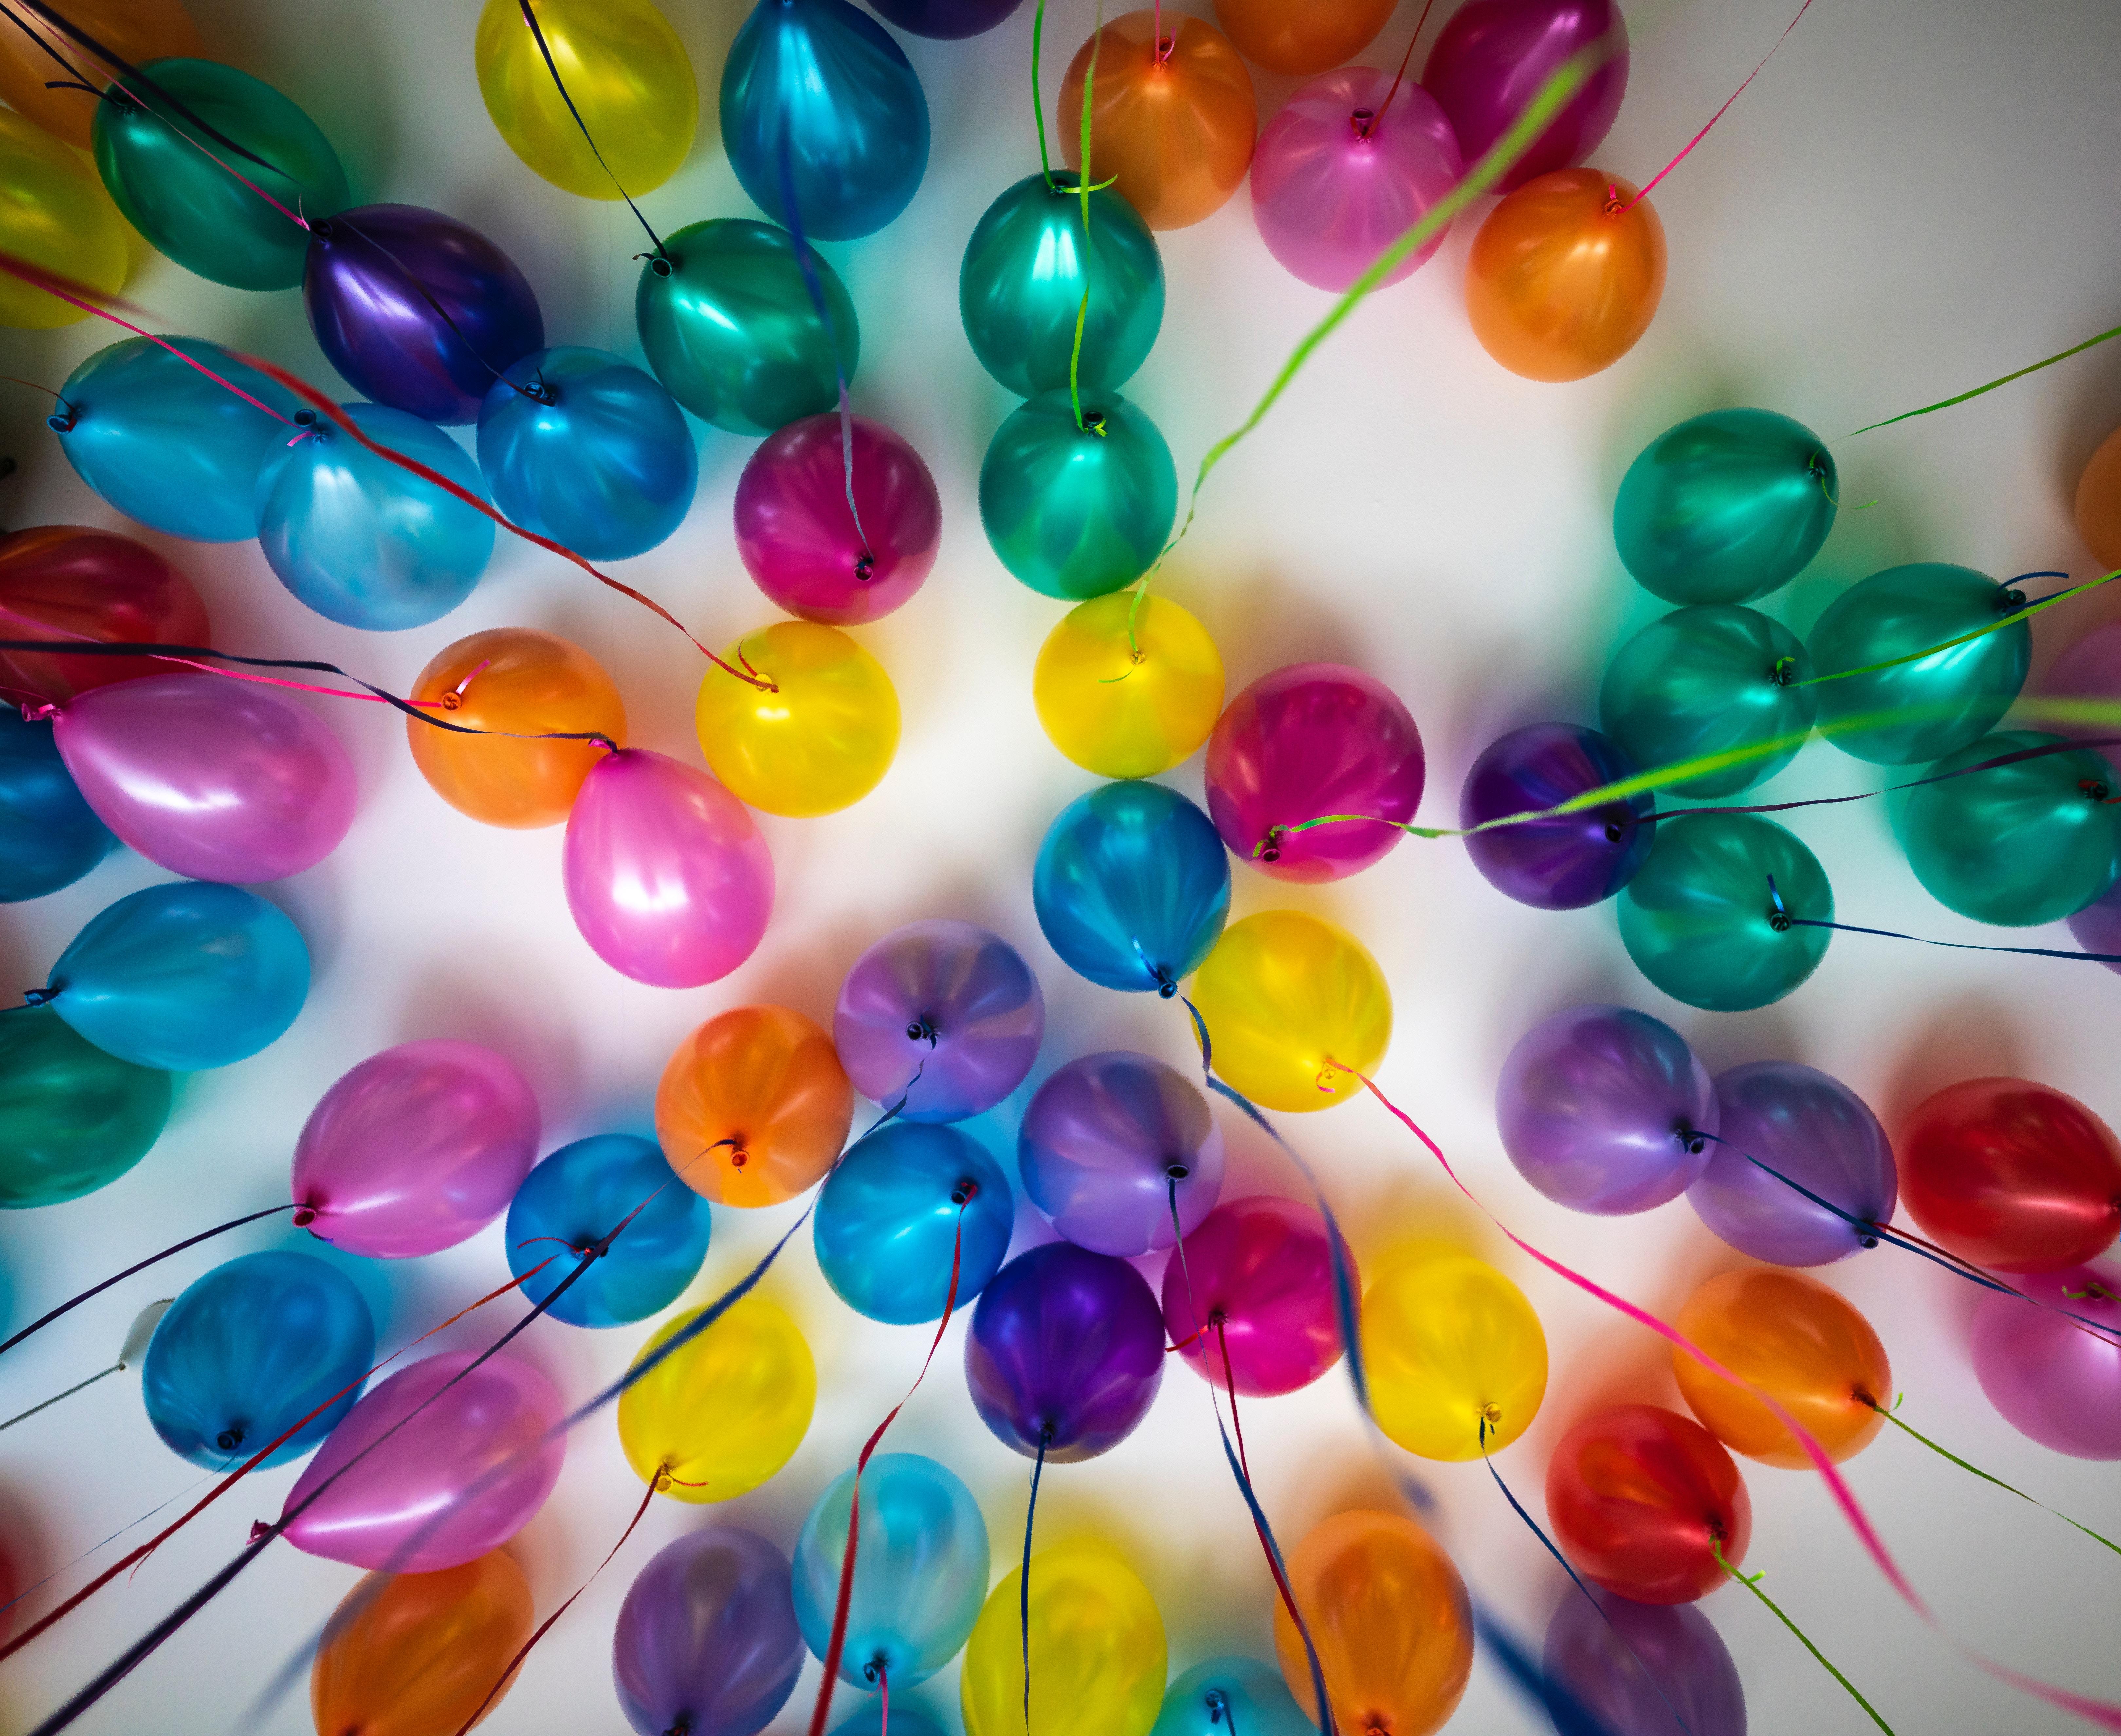 Helium Balloon Picture. Download Free Image